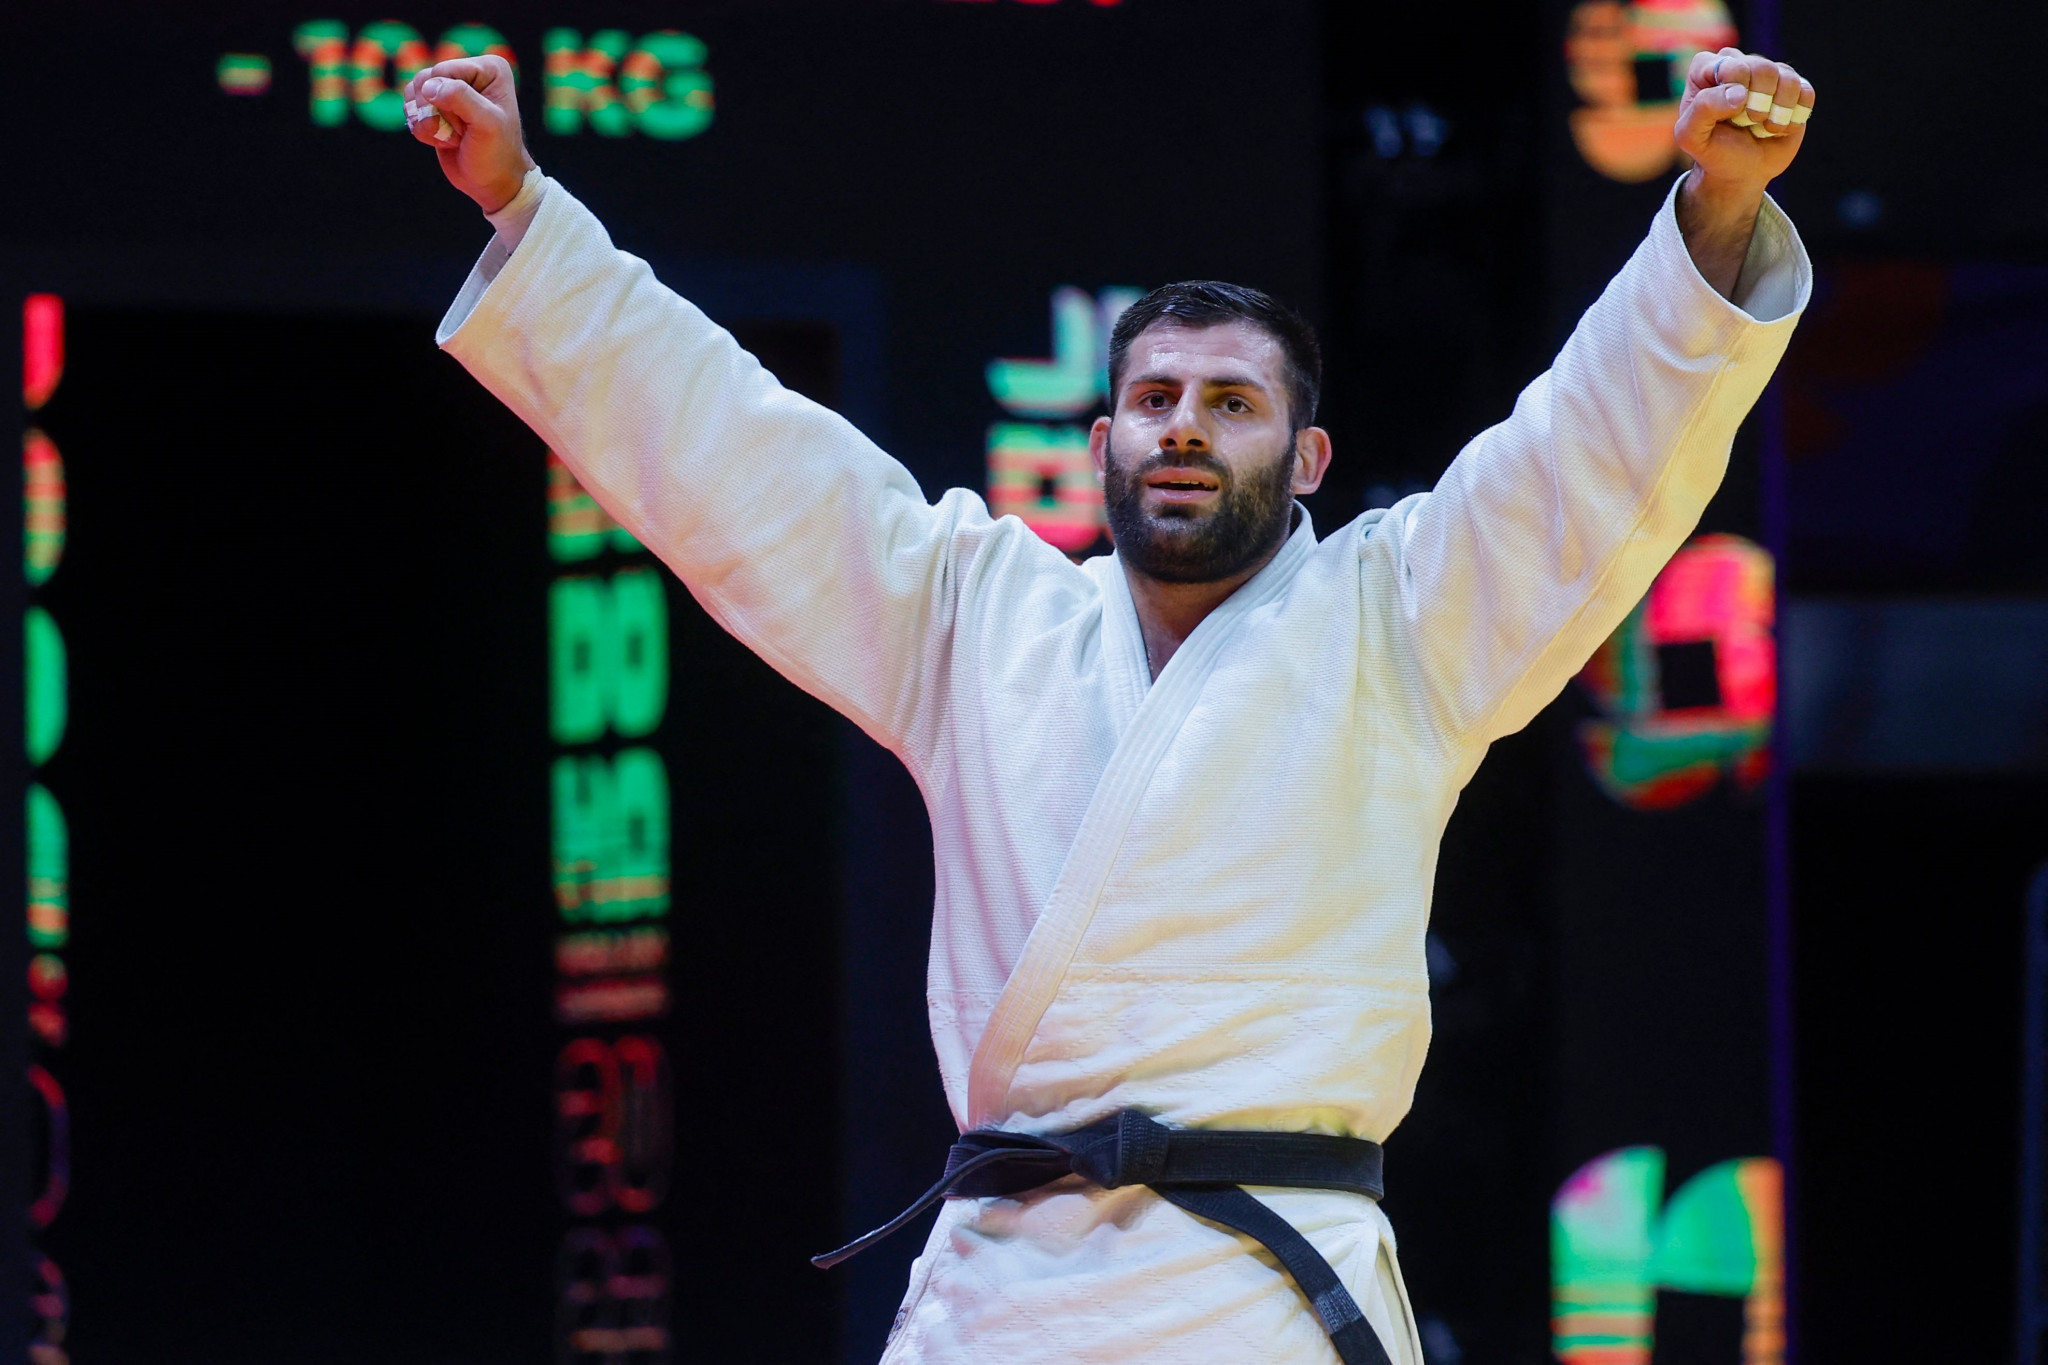 Arman Adamian is the first judoka from the independent neutral athlete delegation to win gold in Doha ©Getty Images